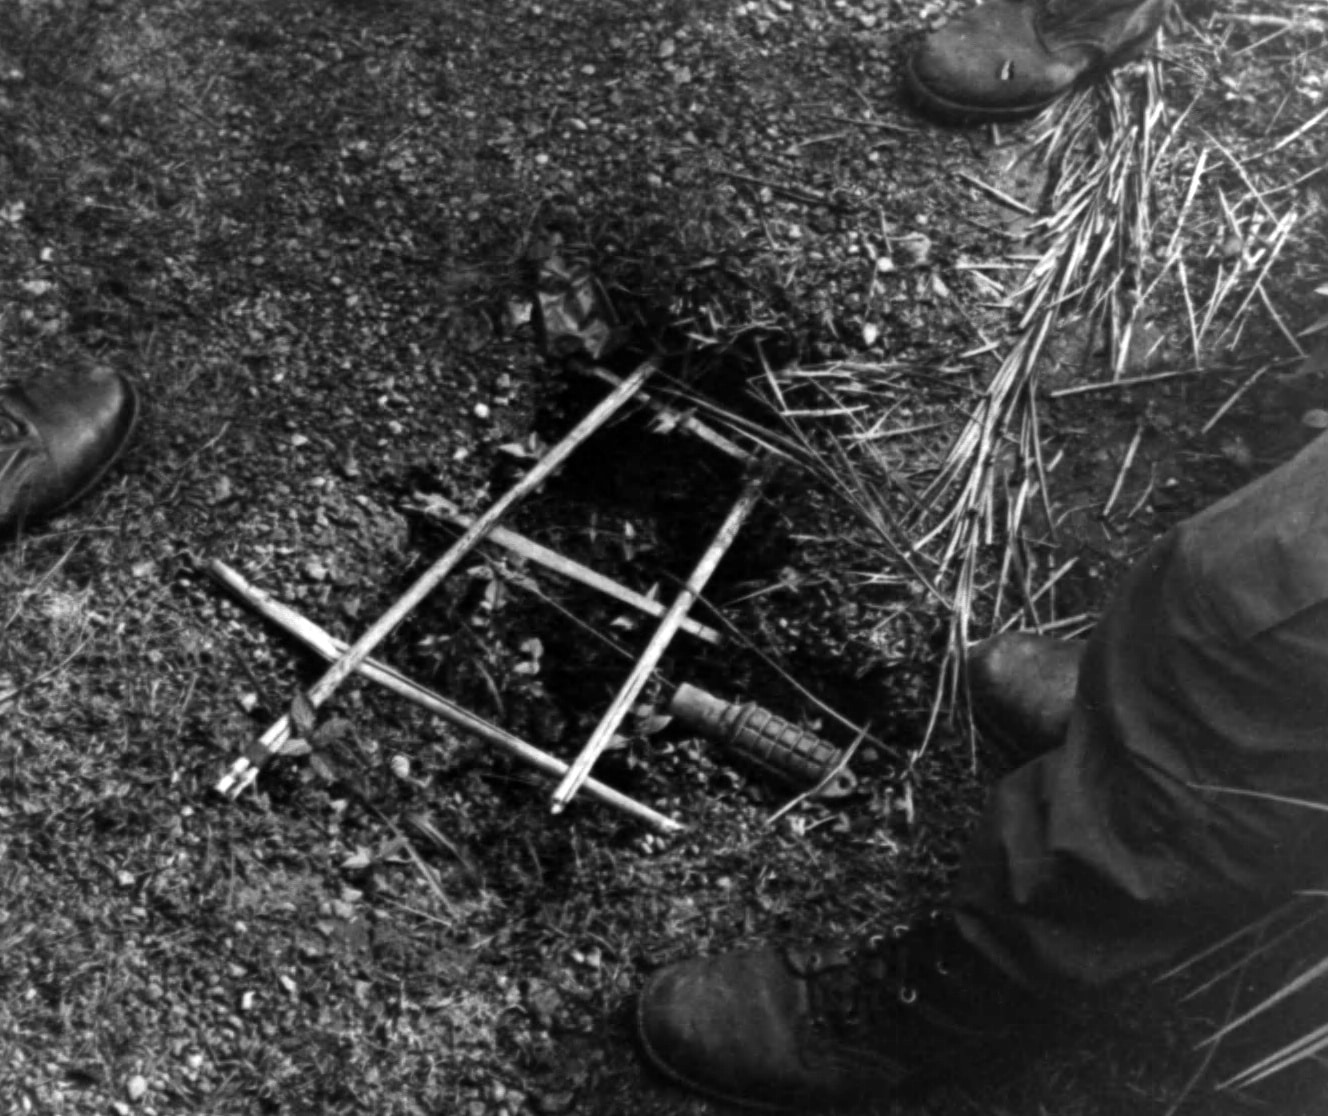 https://www.thearmorylife.com/wp-content/uploads/2021/10/article-dangerous-steps-viet-cong-booby-traps-2.jpg